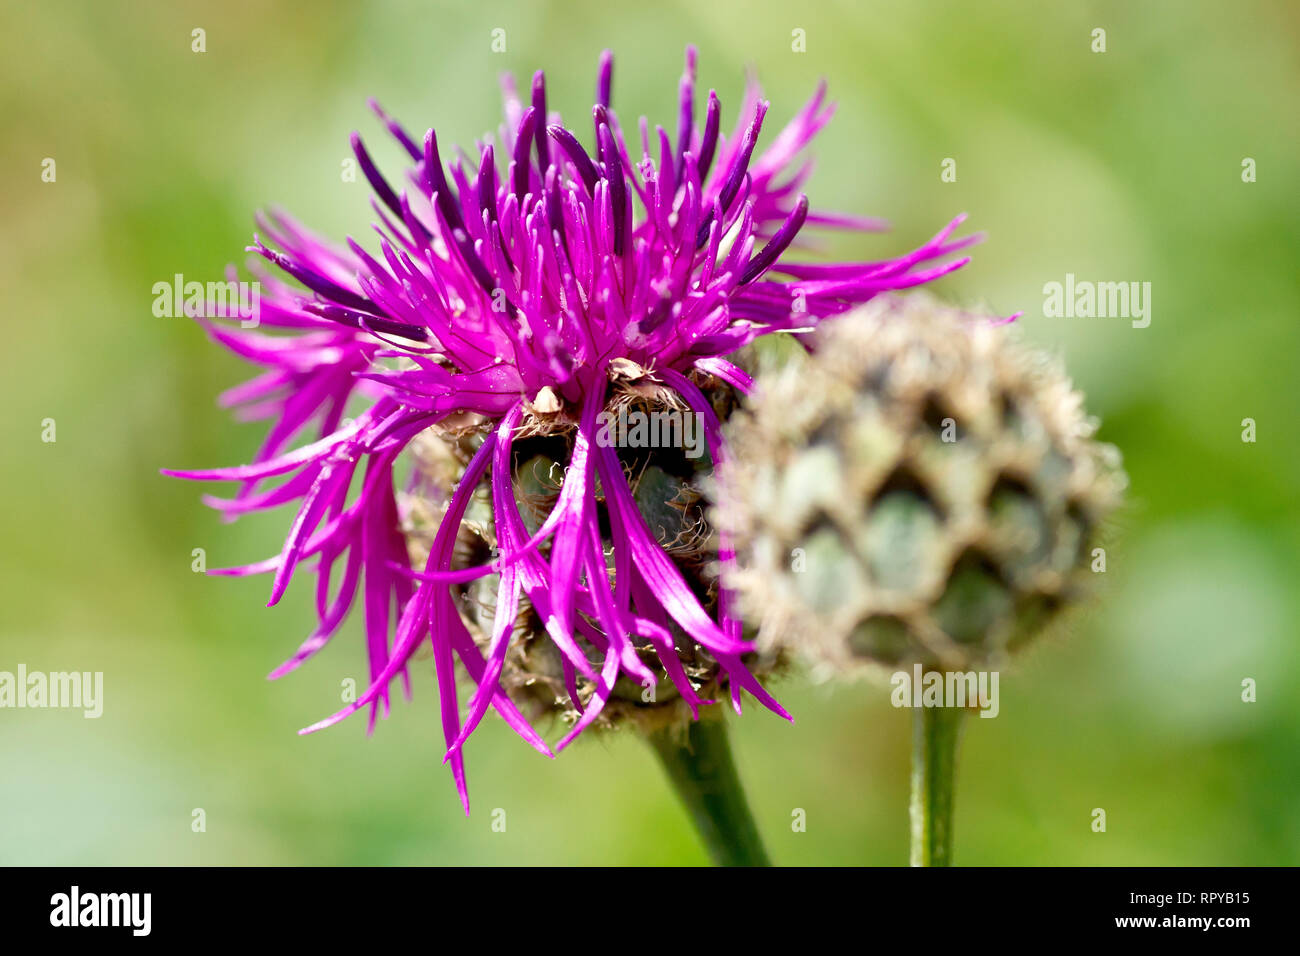 Greater Knapweed (centaurea scabiosa), close up of a single flower with bud. Stock Photo